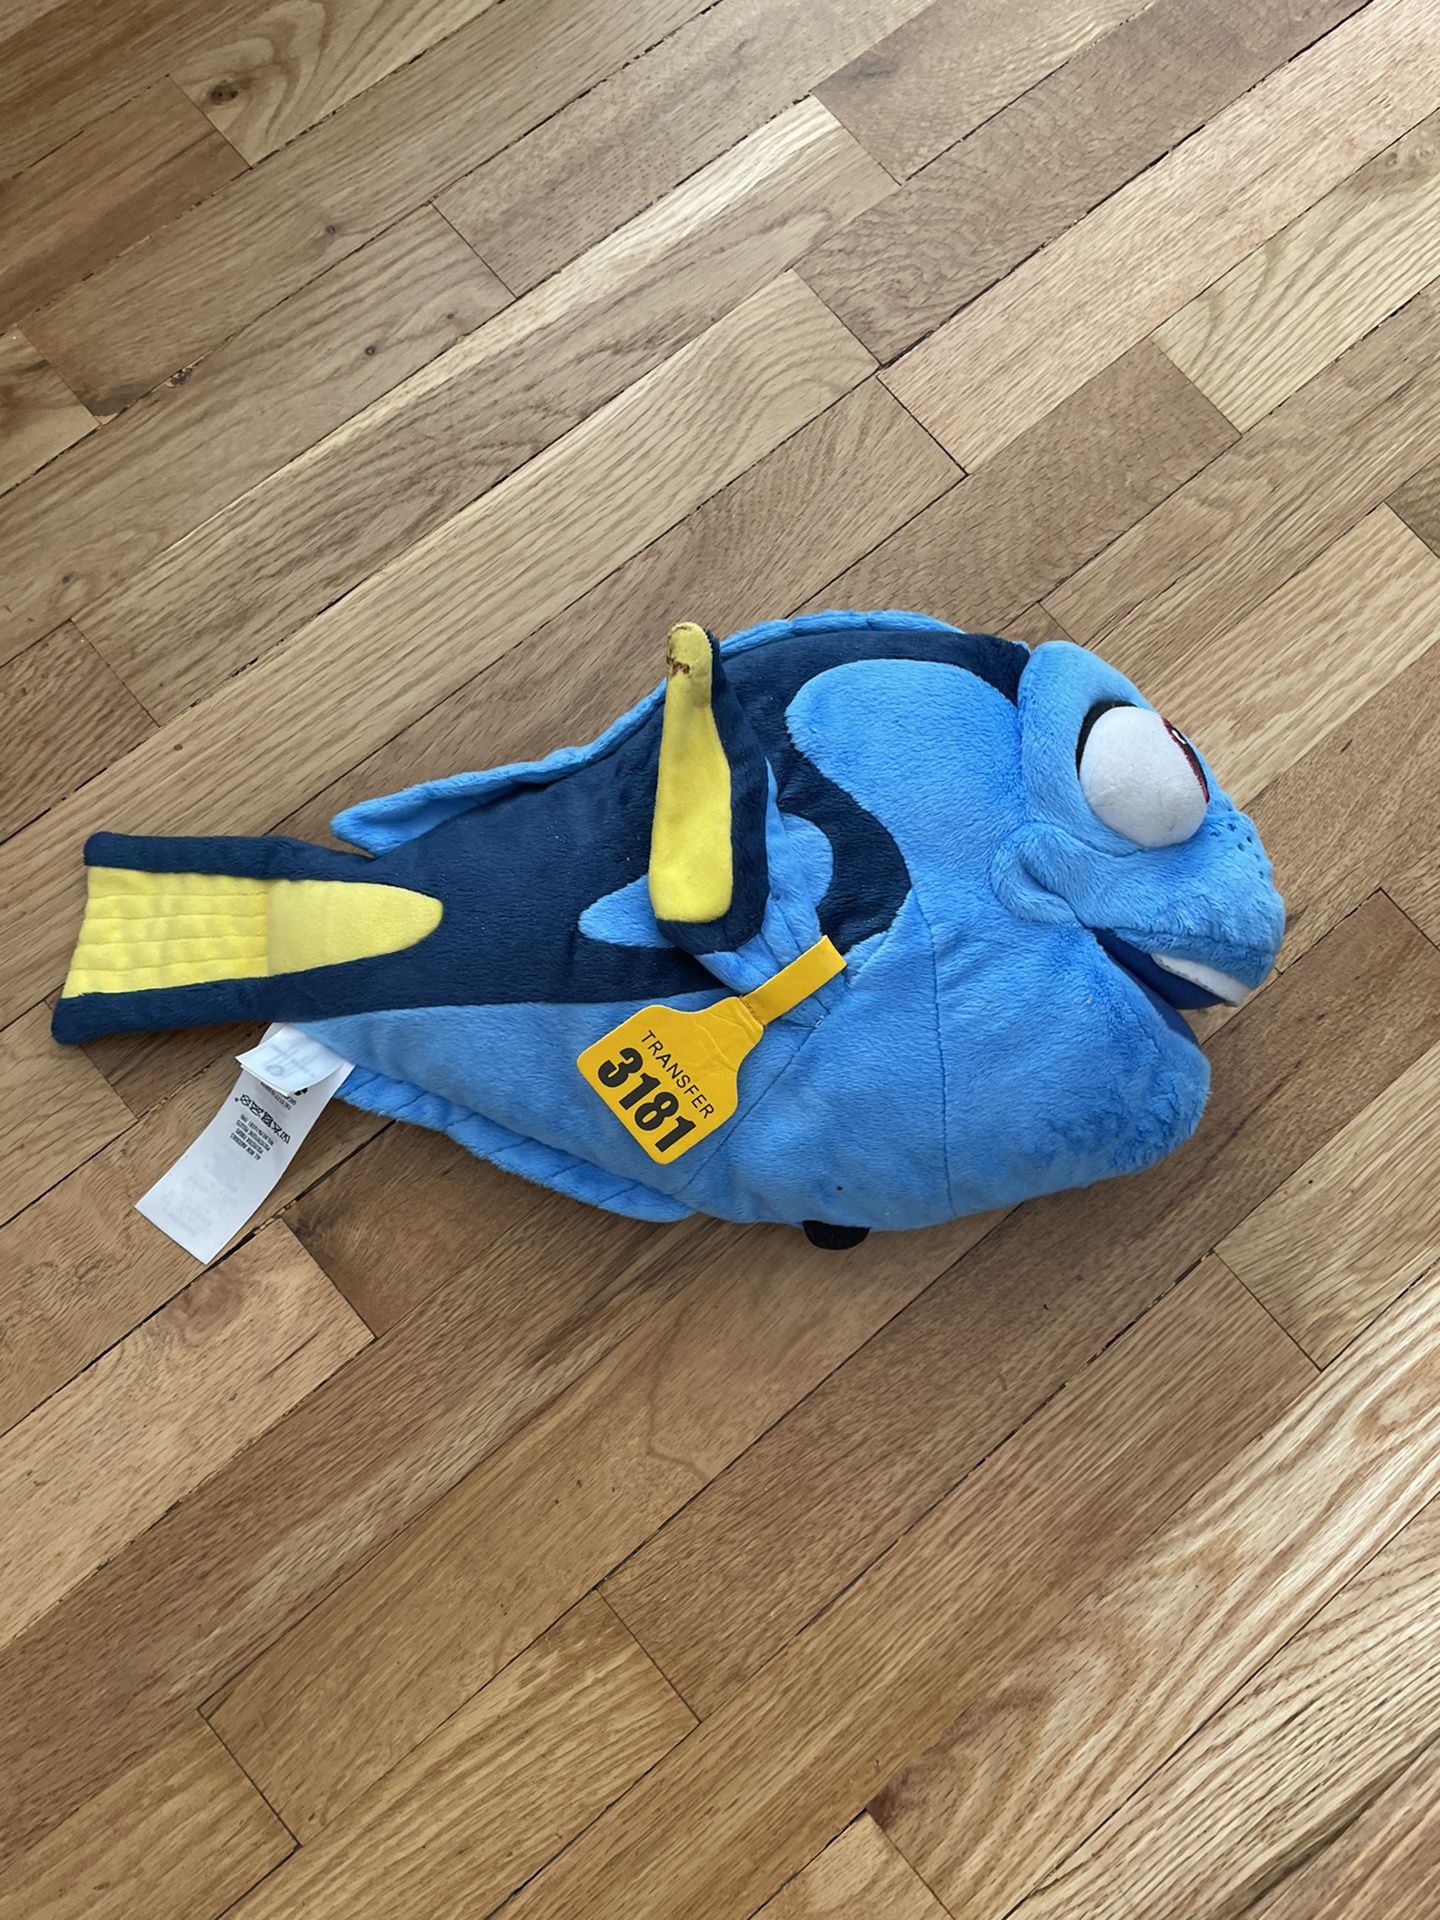 Plush Dory From Finding Nemo